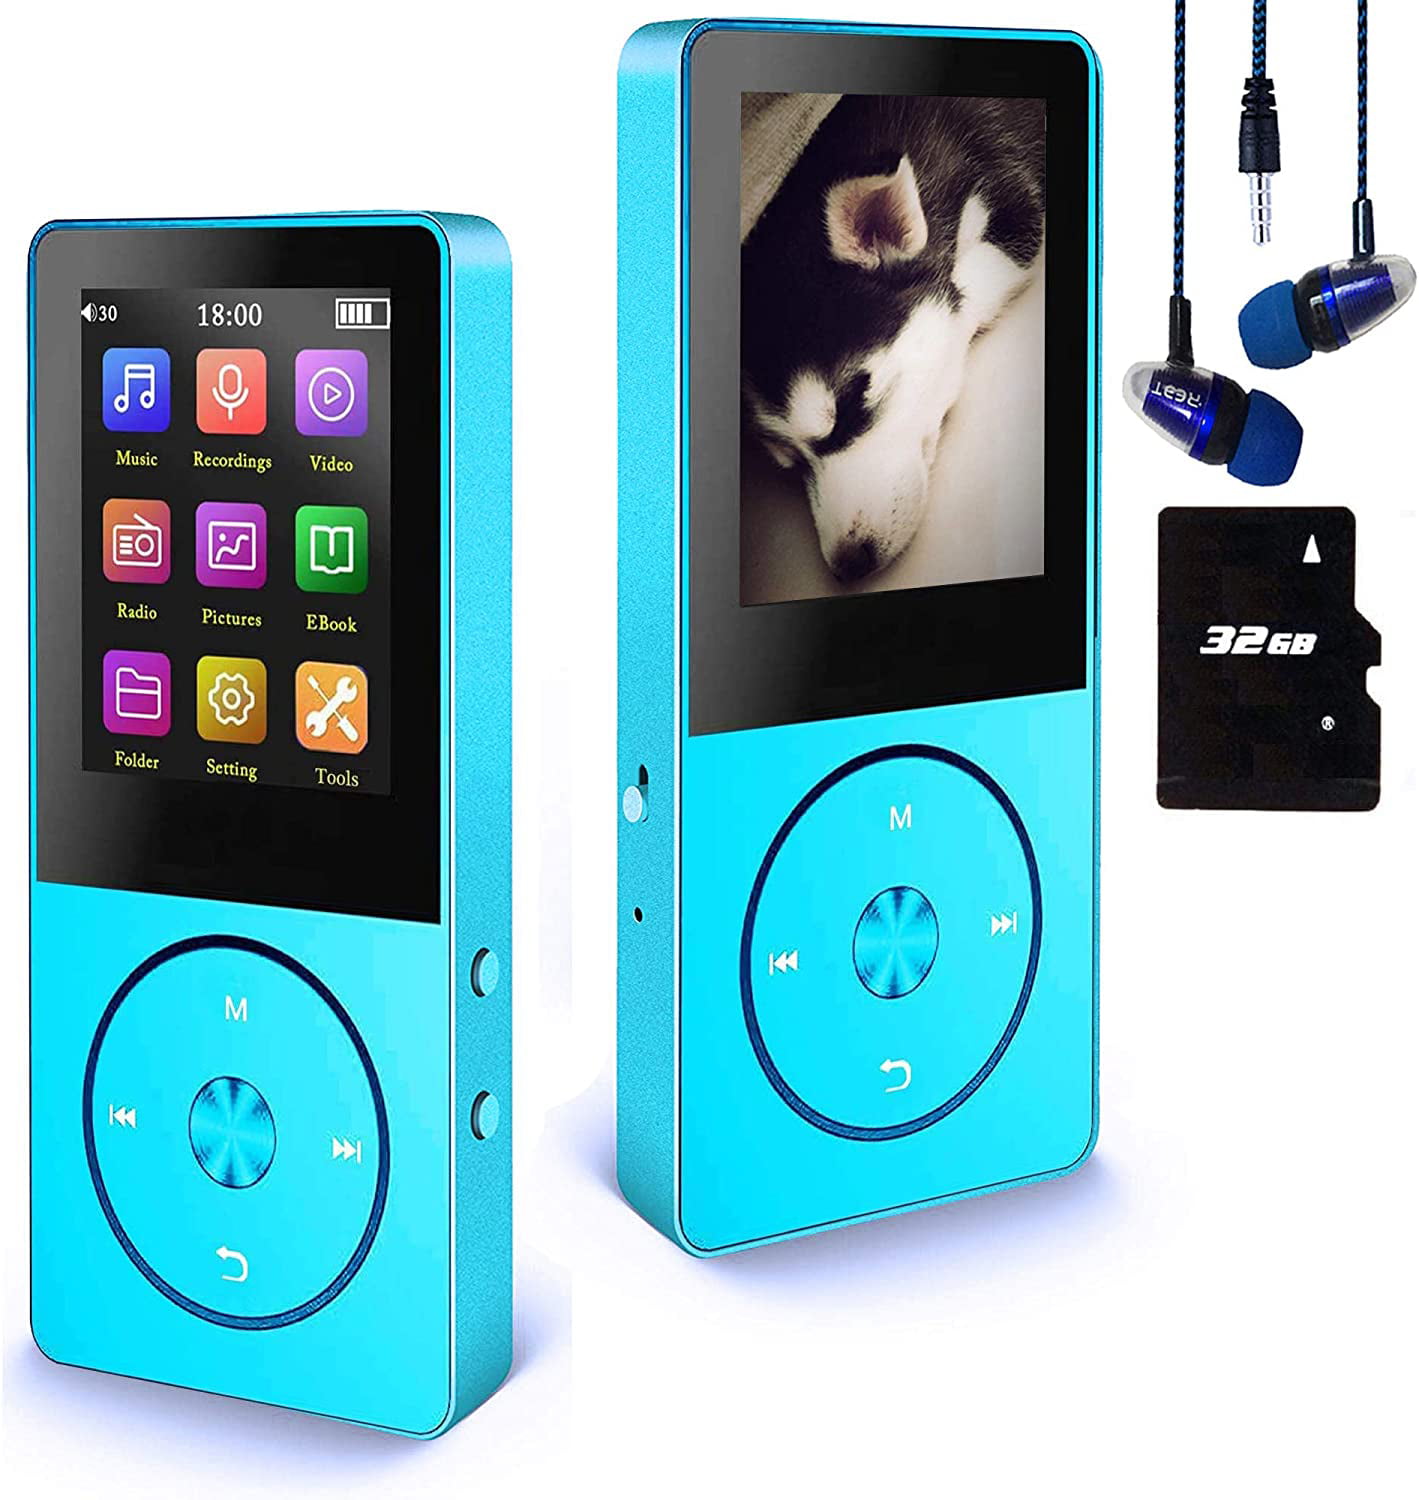 MP3 Player Voice Record MP4 Player Hotechs MP3 Music Player with 32GB Memory SD Card Slim Classic Digital LCD 1.82 Screen Mini USB Port with FM Radio 